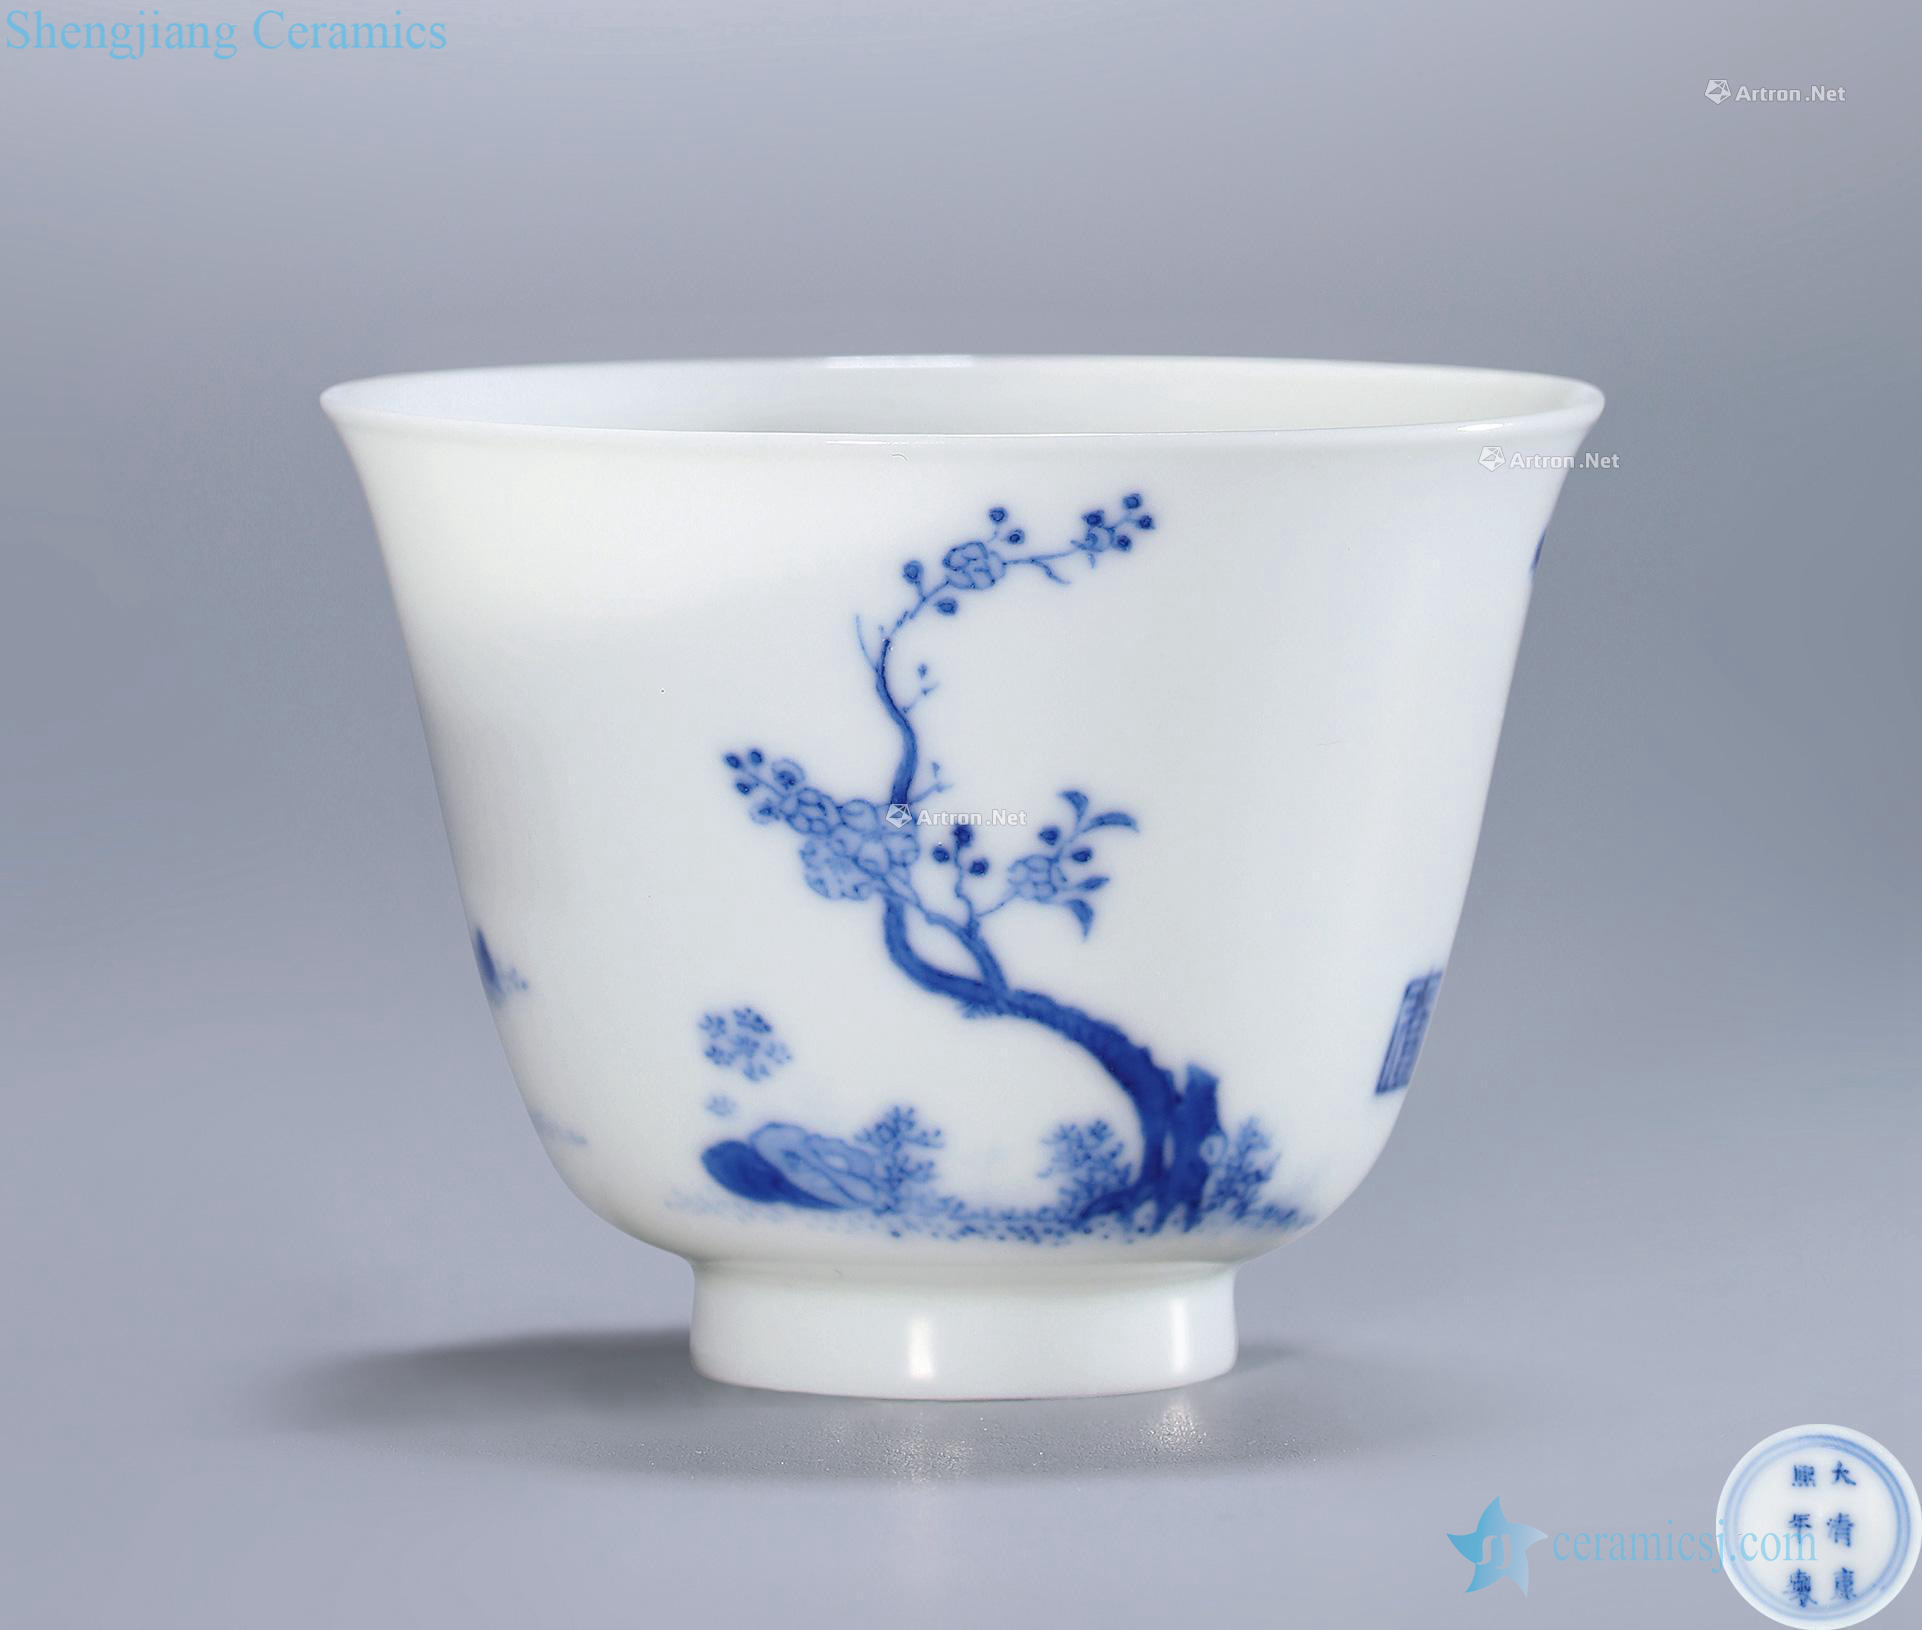 The qing emperor kangxi porcelain "February apricot blossom" god of cup